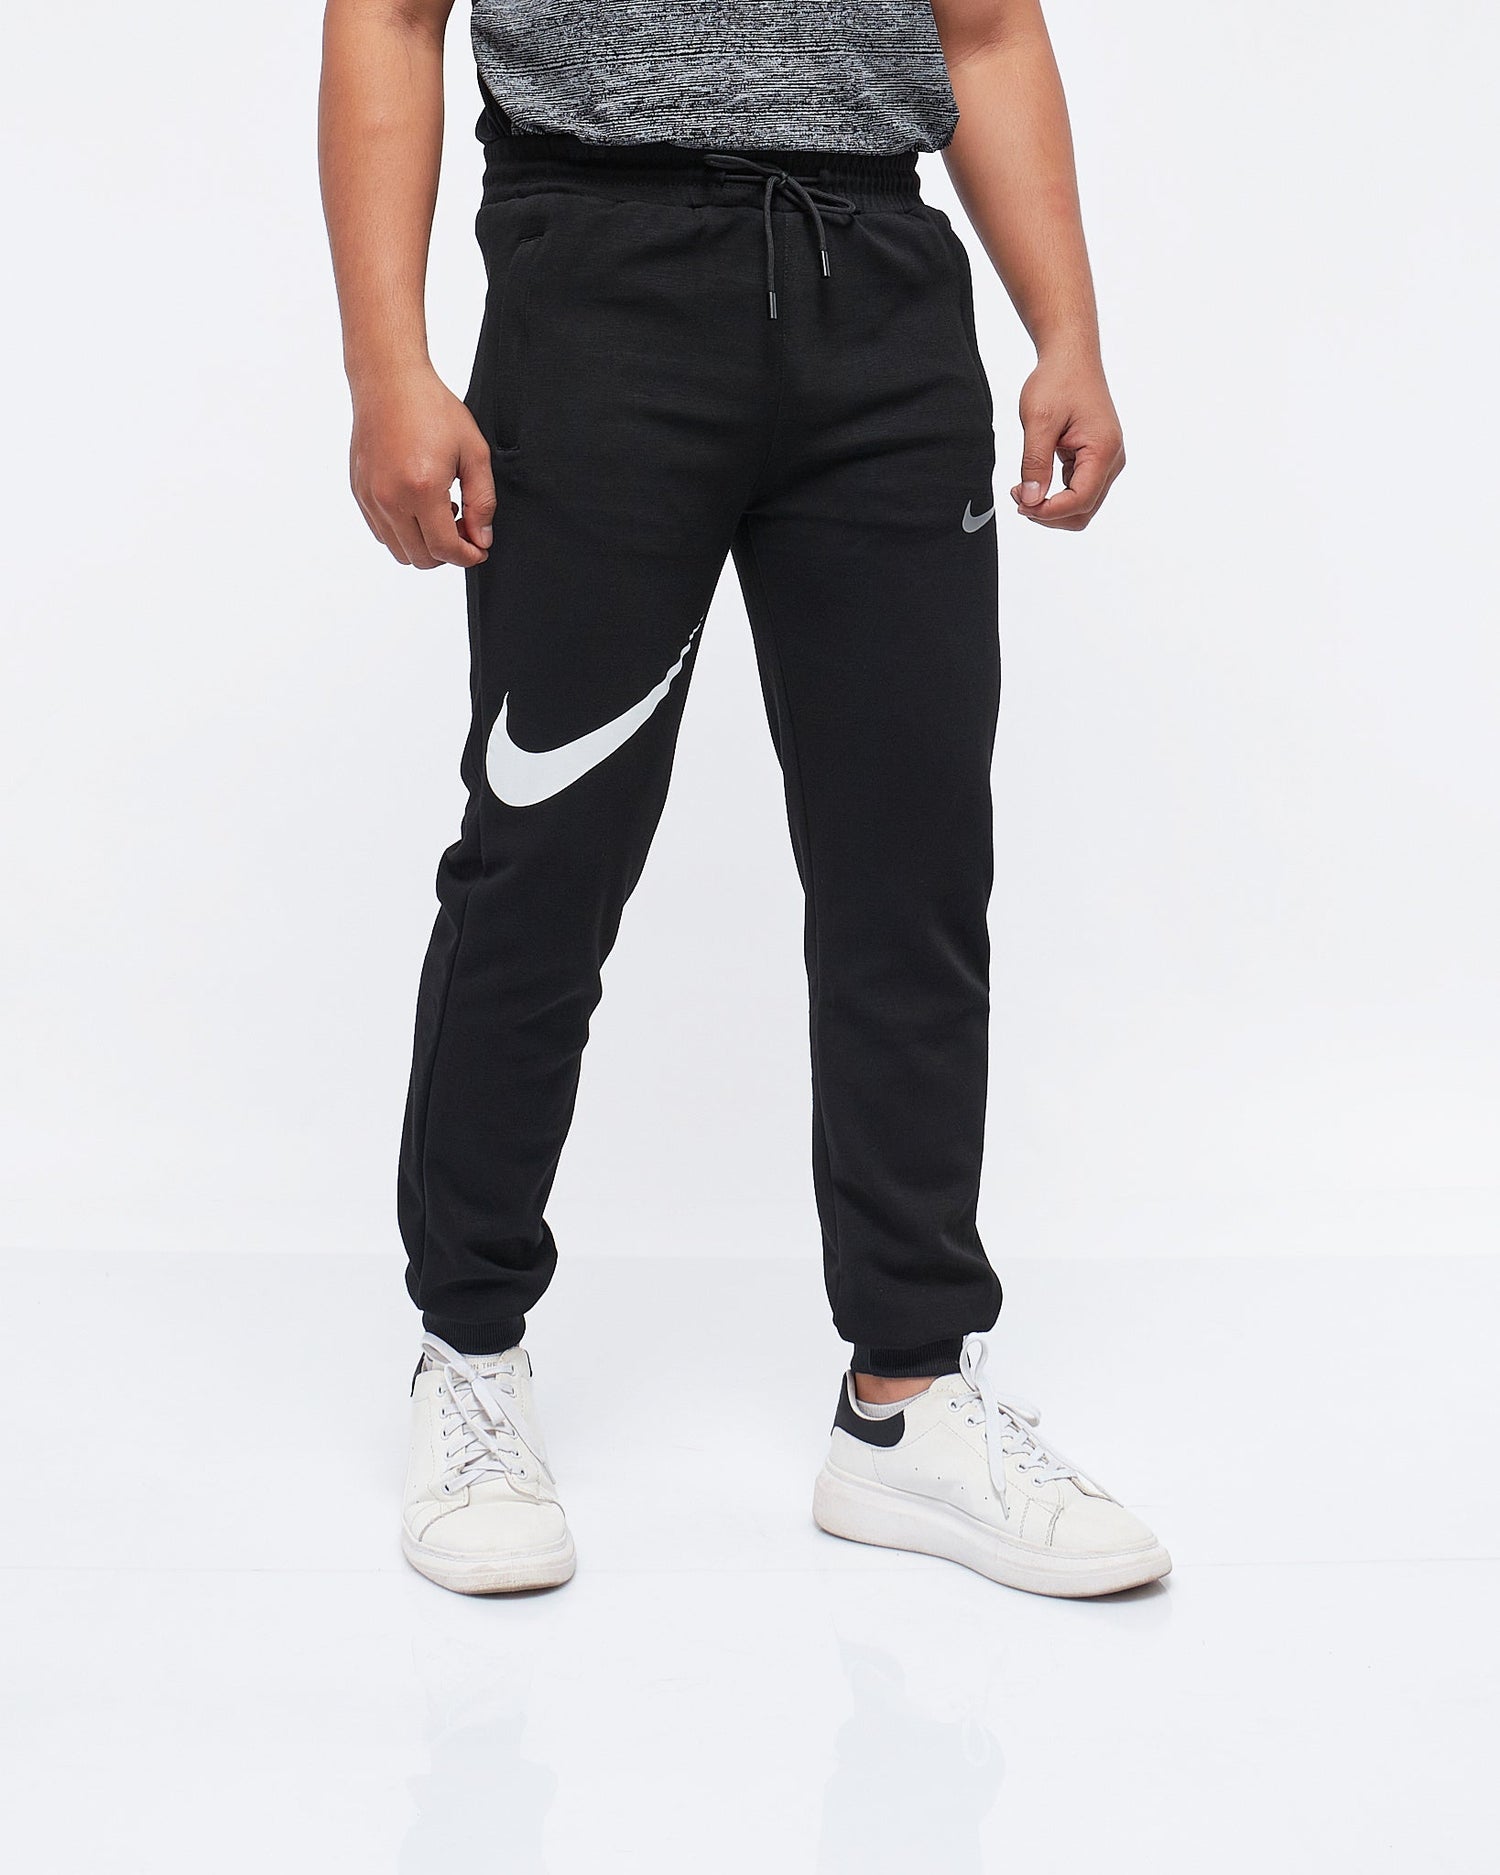 MOI OUTFIT-Swooh Vertical Printed Men Joggers 15.90